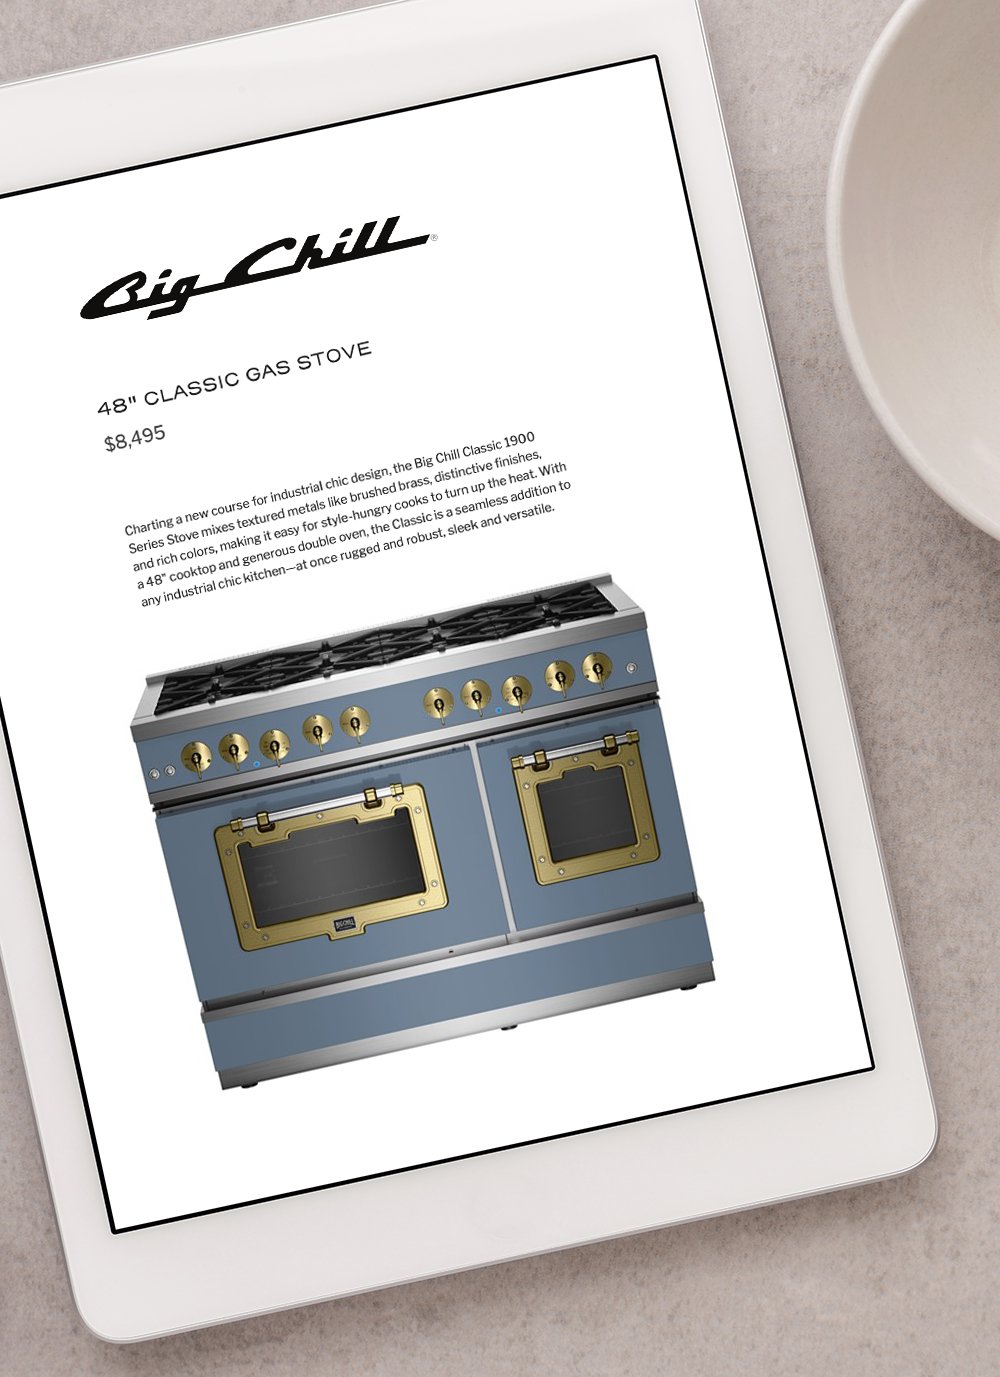 Spring Appliance Collection with Big Chill - roomfortuesday.com